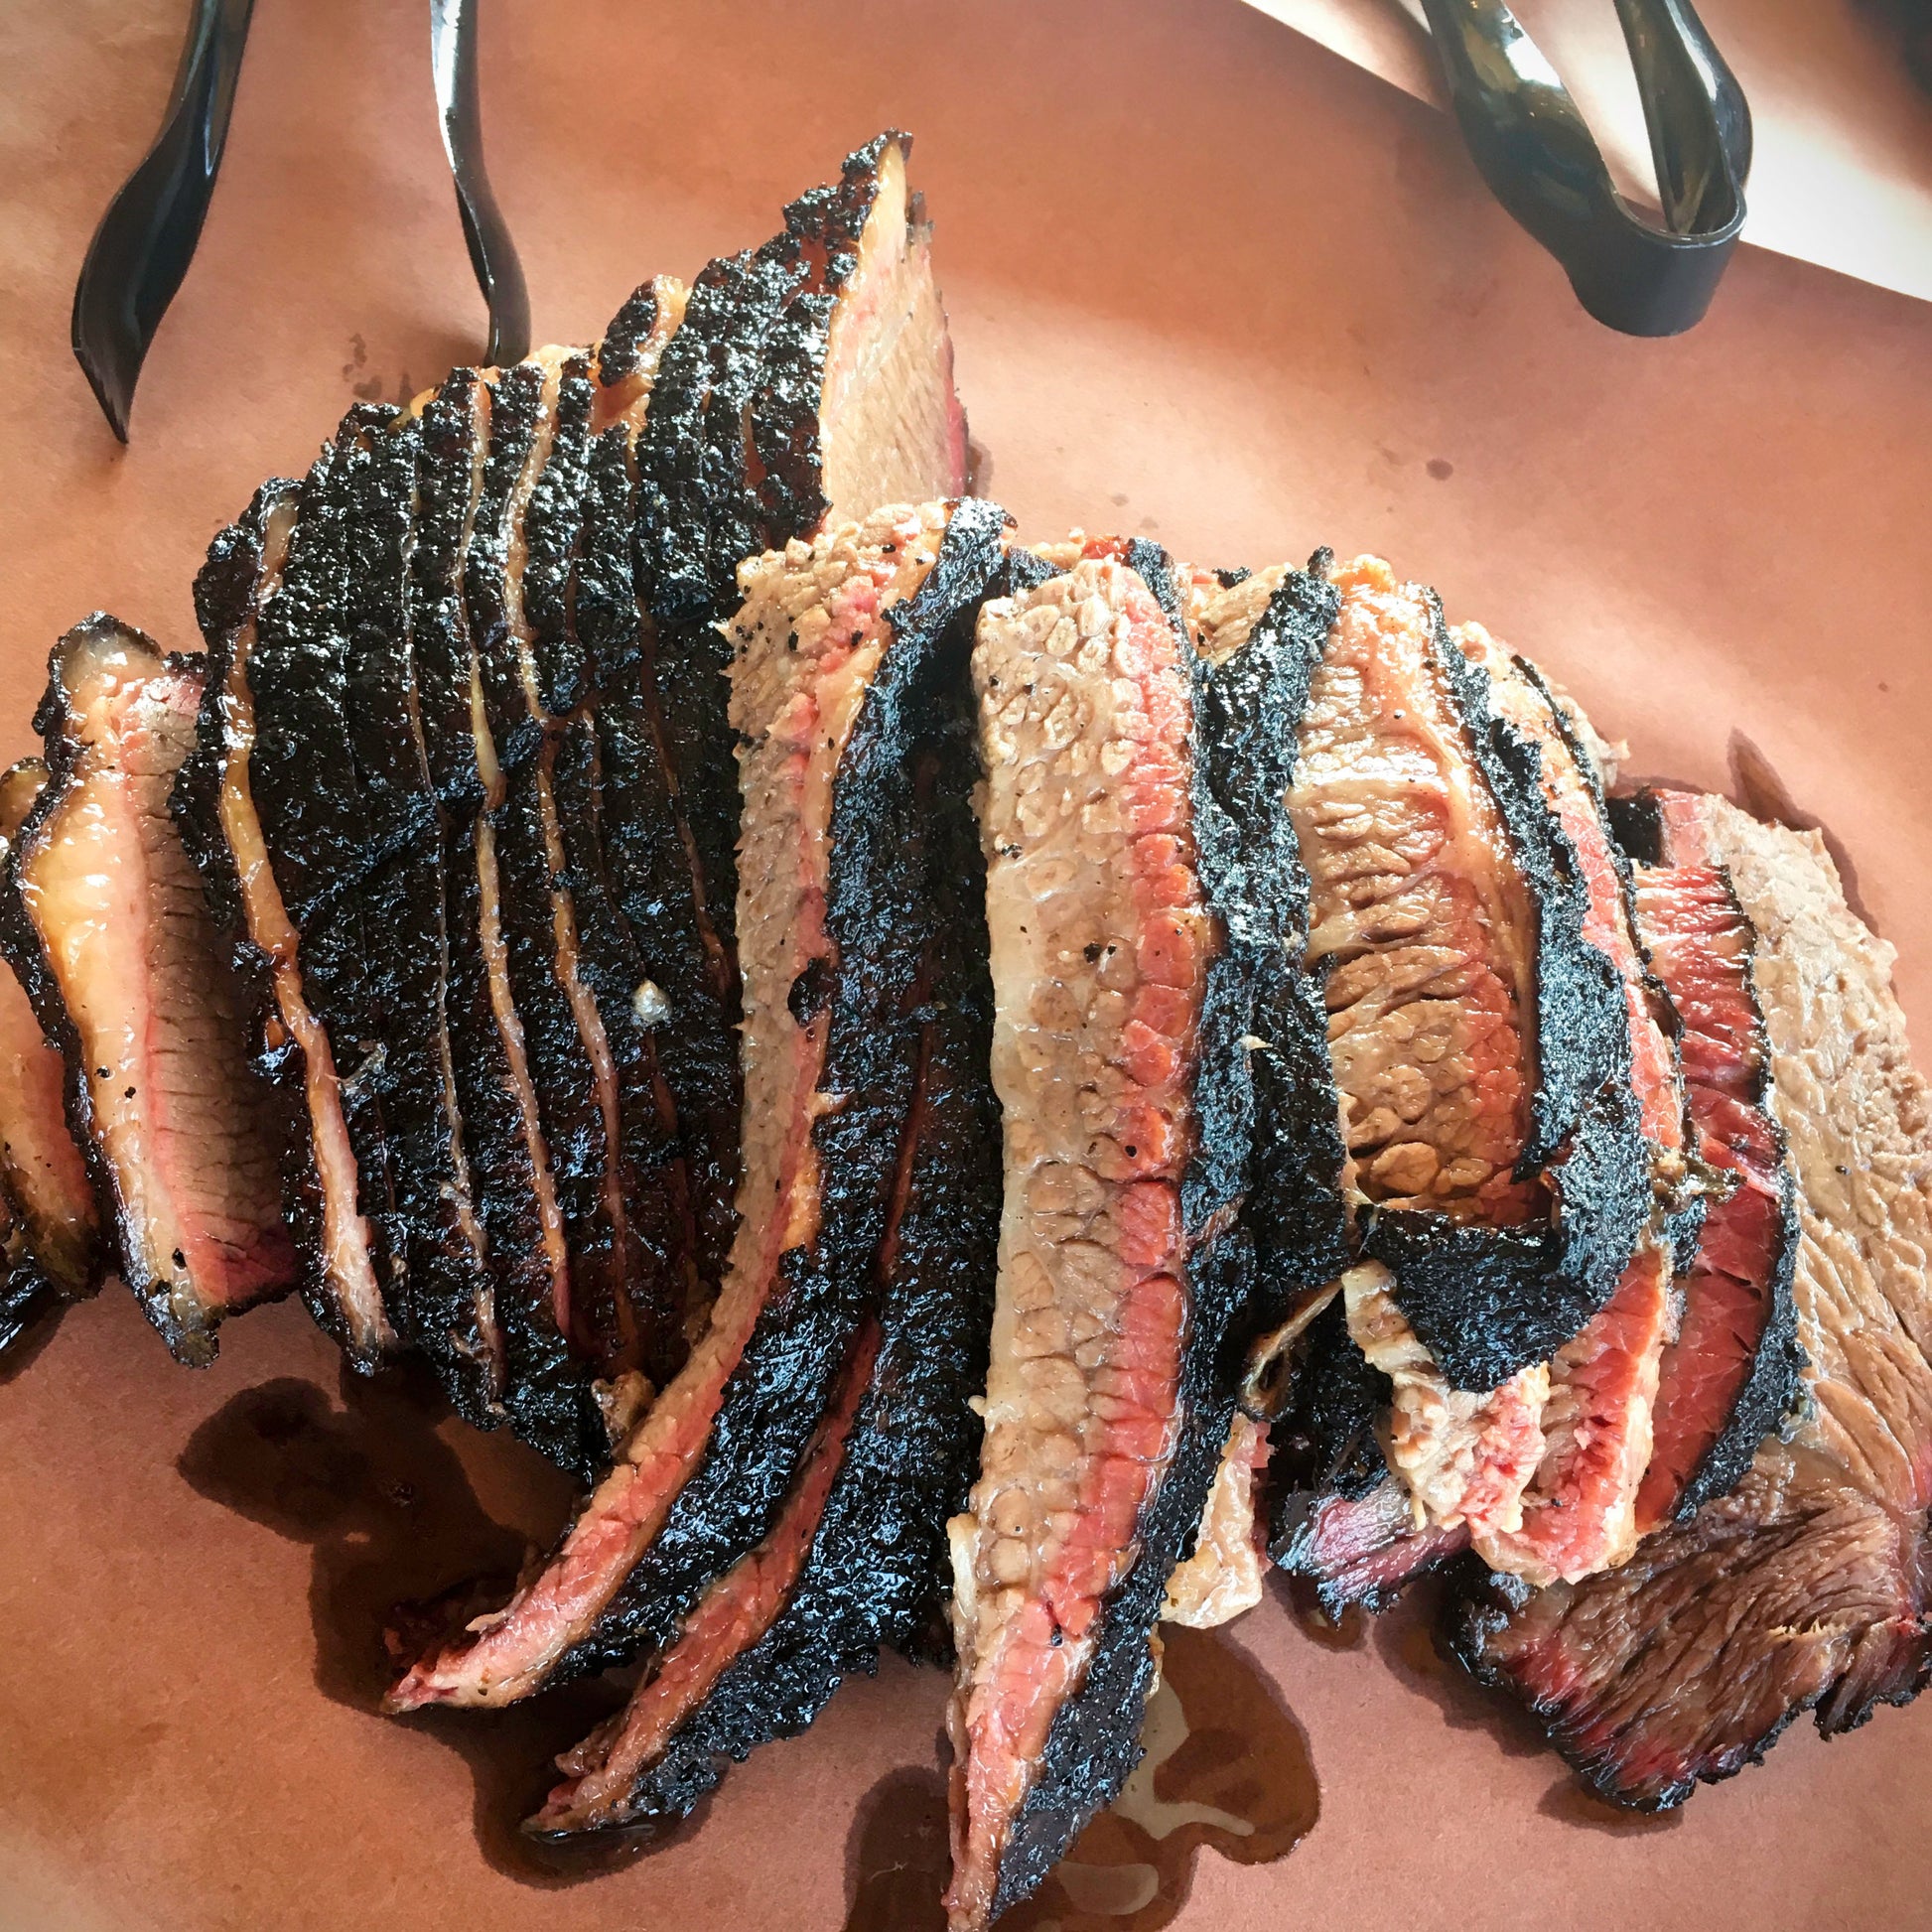 Whole Brisket - Central Texas Style Butcher Paper - The Virtual